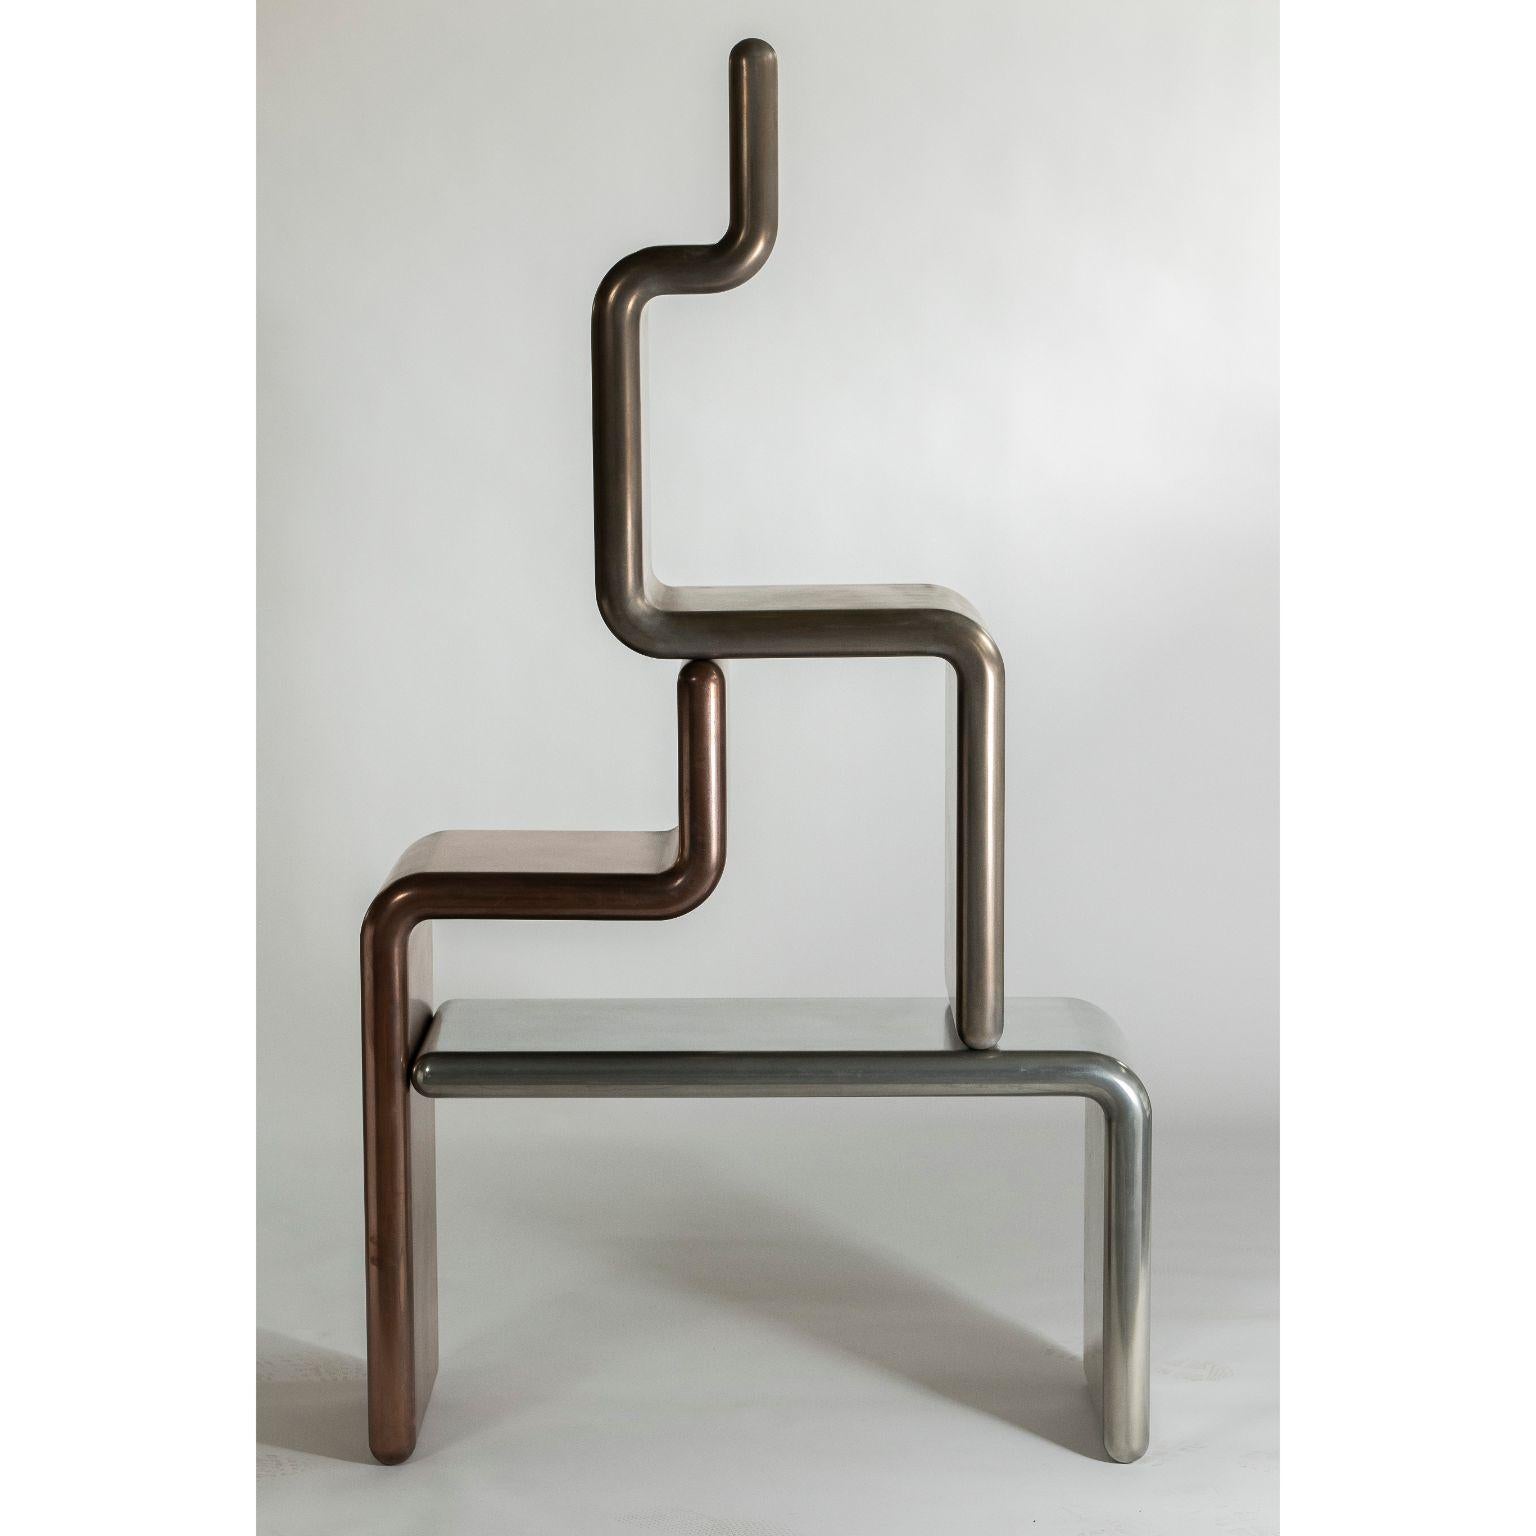 Fluid shelf by Roberto Giacomucci
Materials: Wood, liquid metal
Dimensions: L 100 x P 40 x H 180 cm

The freak collection is made of wood coated with liquid metal, a 95% real metal paint and like the metal oxidizes over time.

Roberto